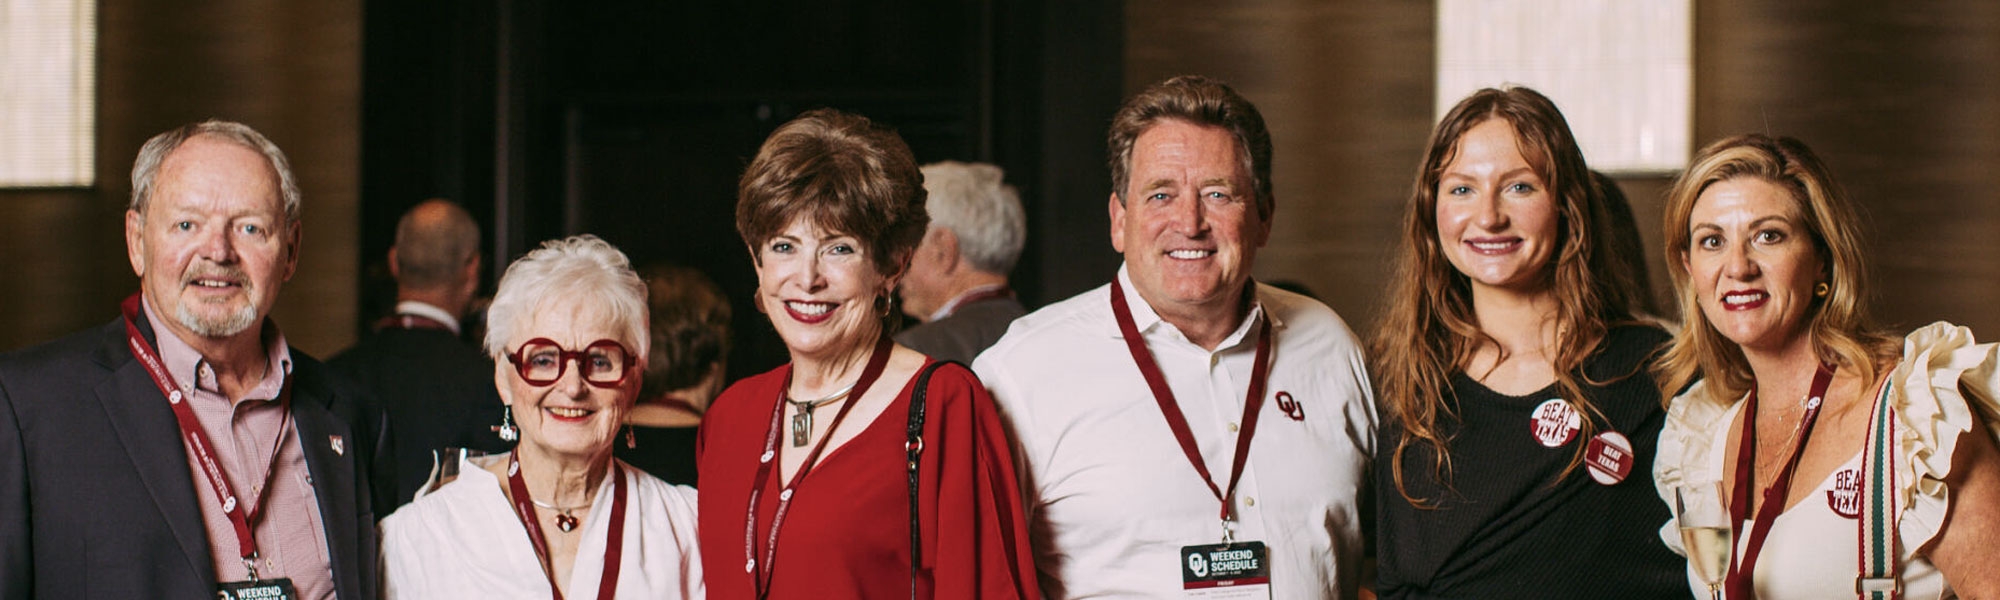 A group of many different generations of OU alumni celebrate together during an OU event.